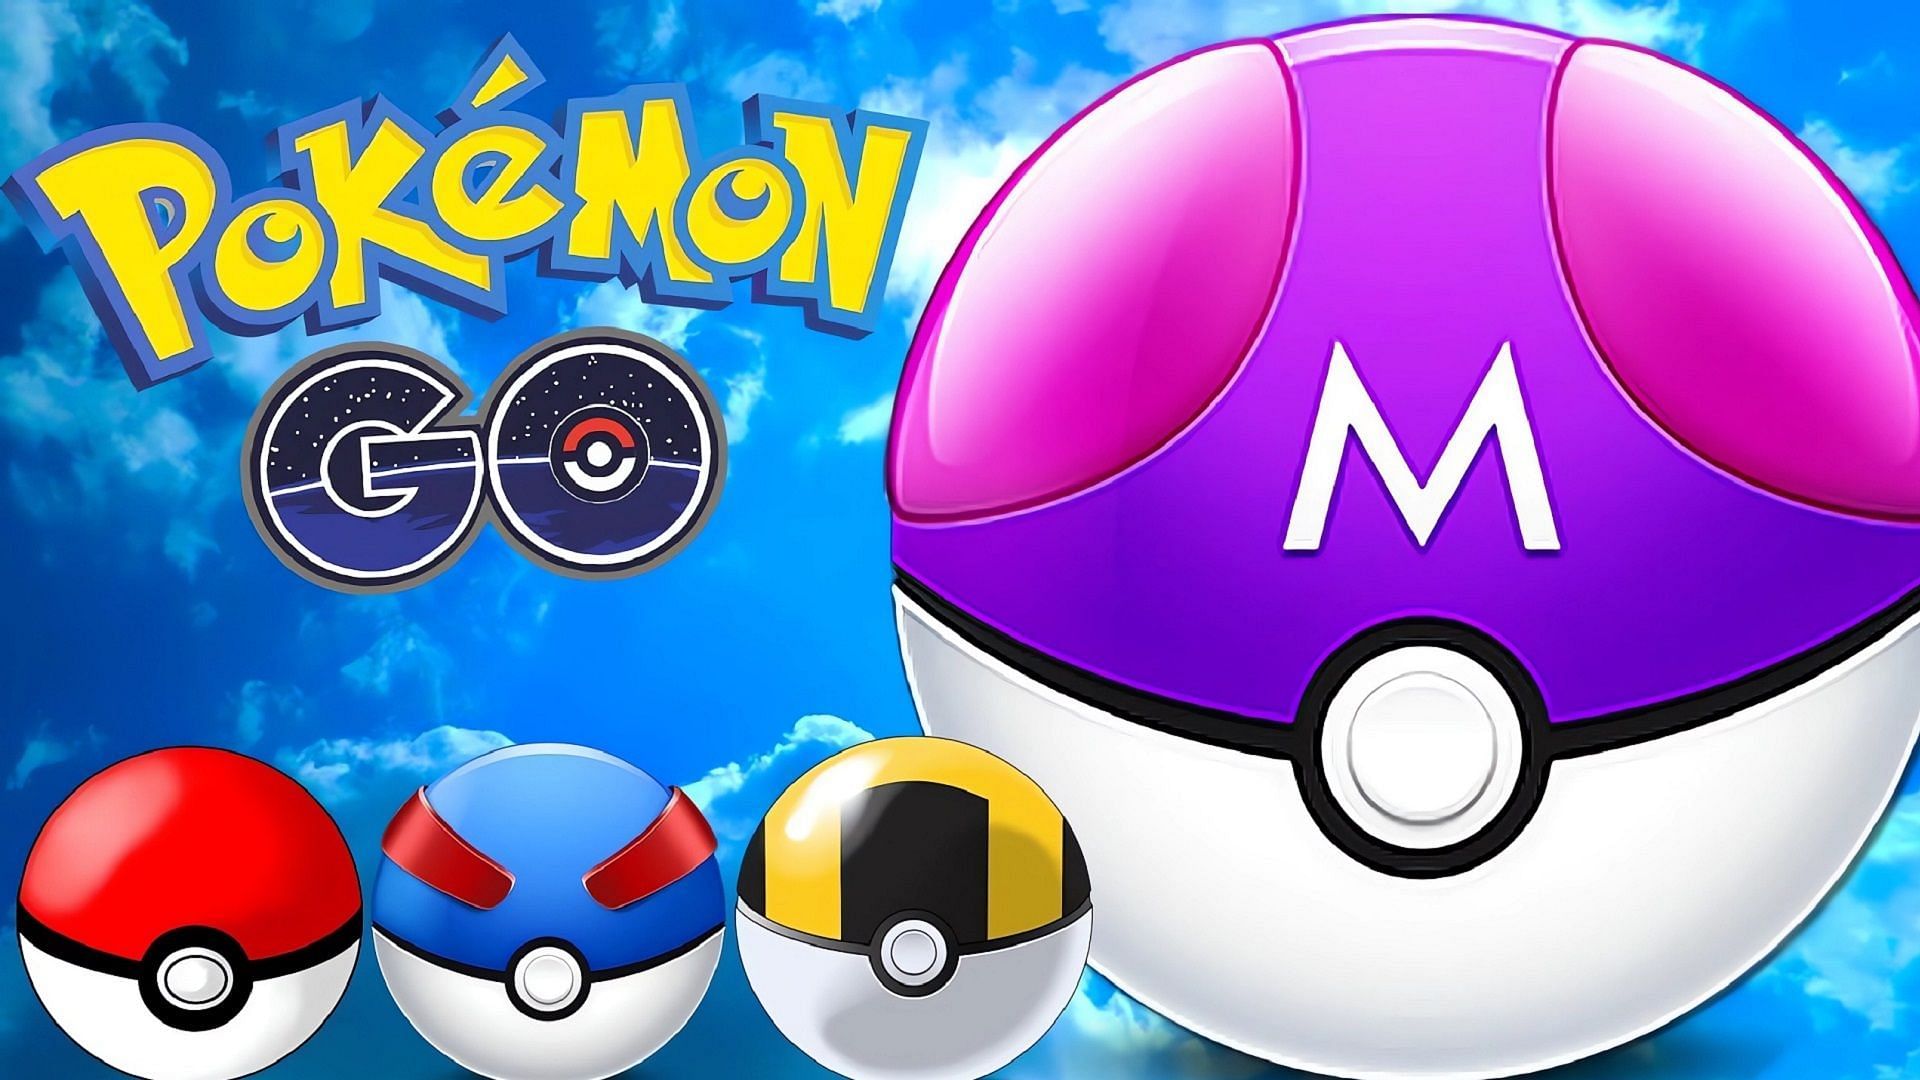 Master Balls are coming to Pokemon GO, and Niantic appears ready to drop a corresponding trailer (Image via Chaos/YouTube)